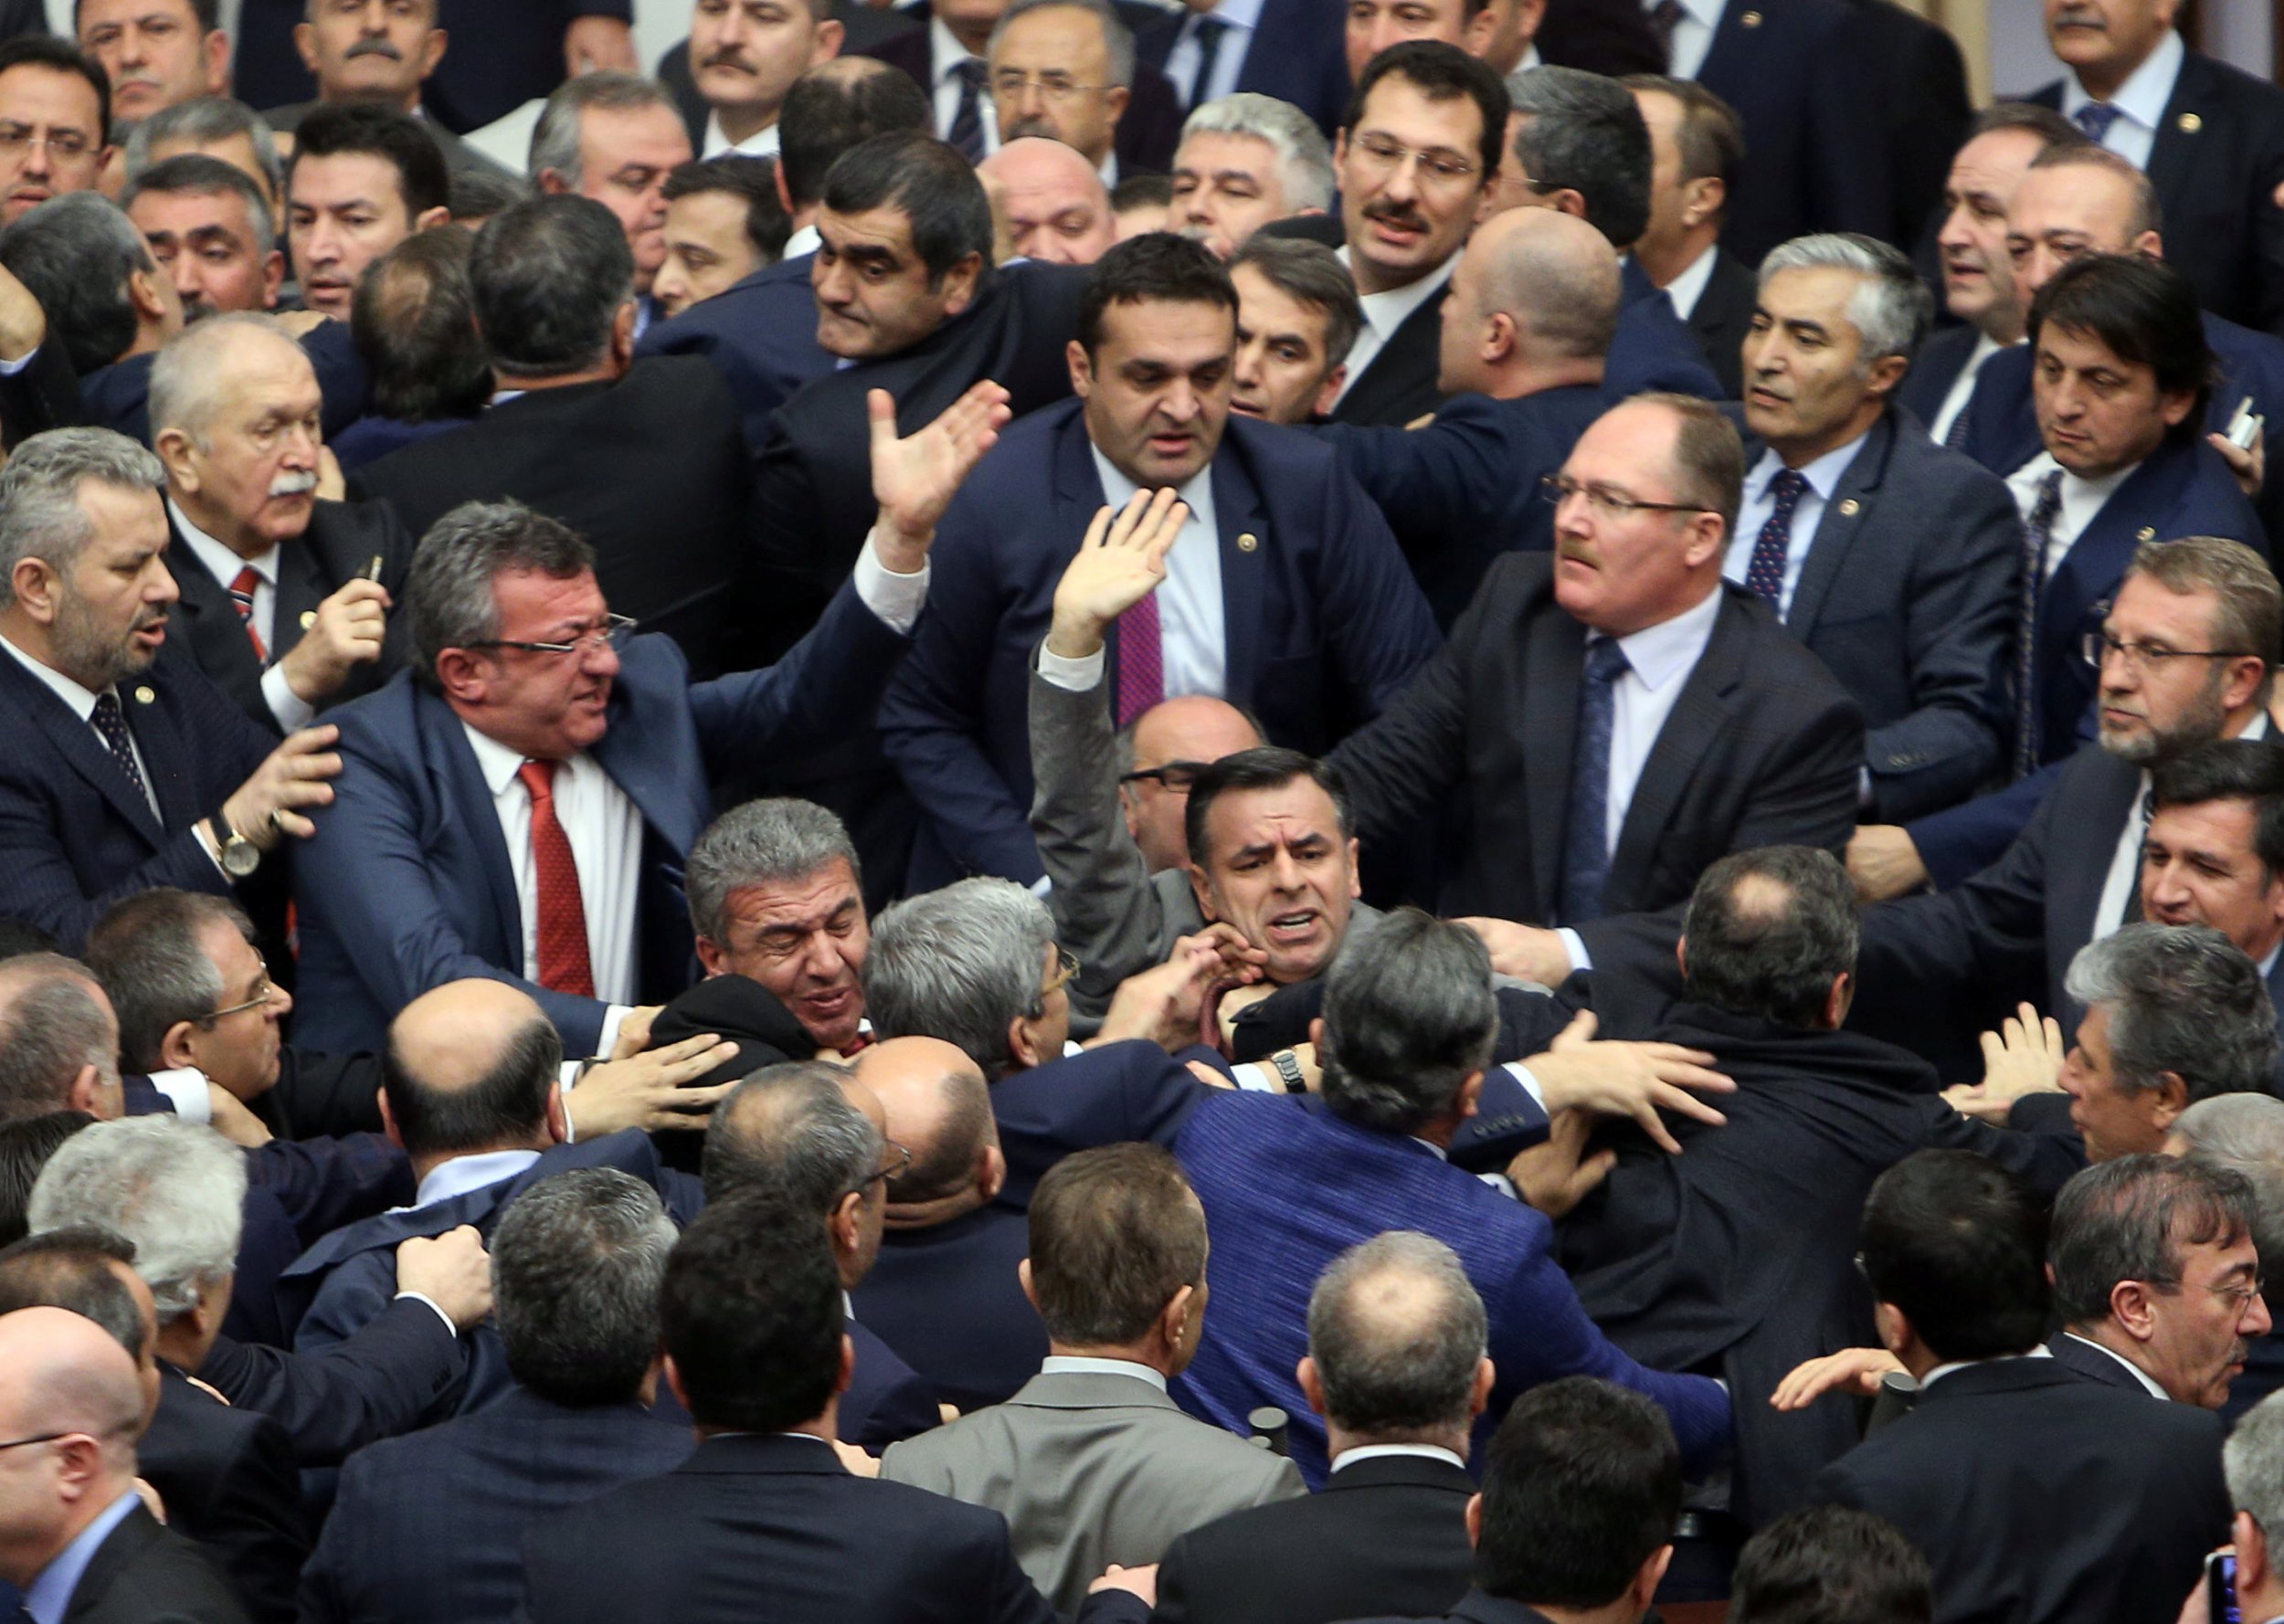 A number of politicians were injured in the fight, image via Reuters